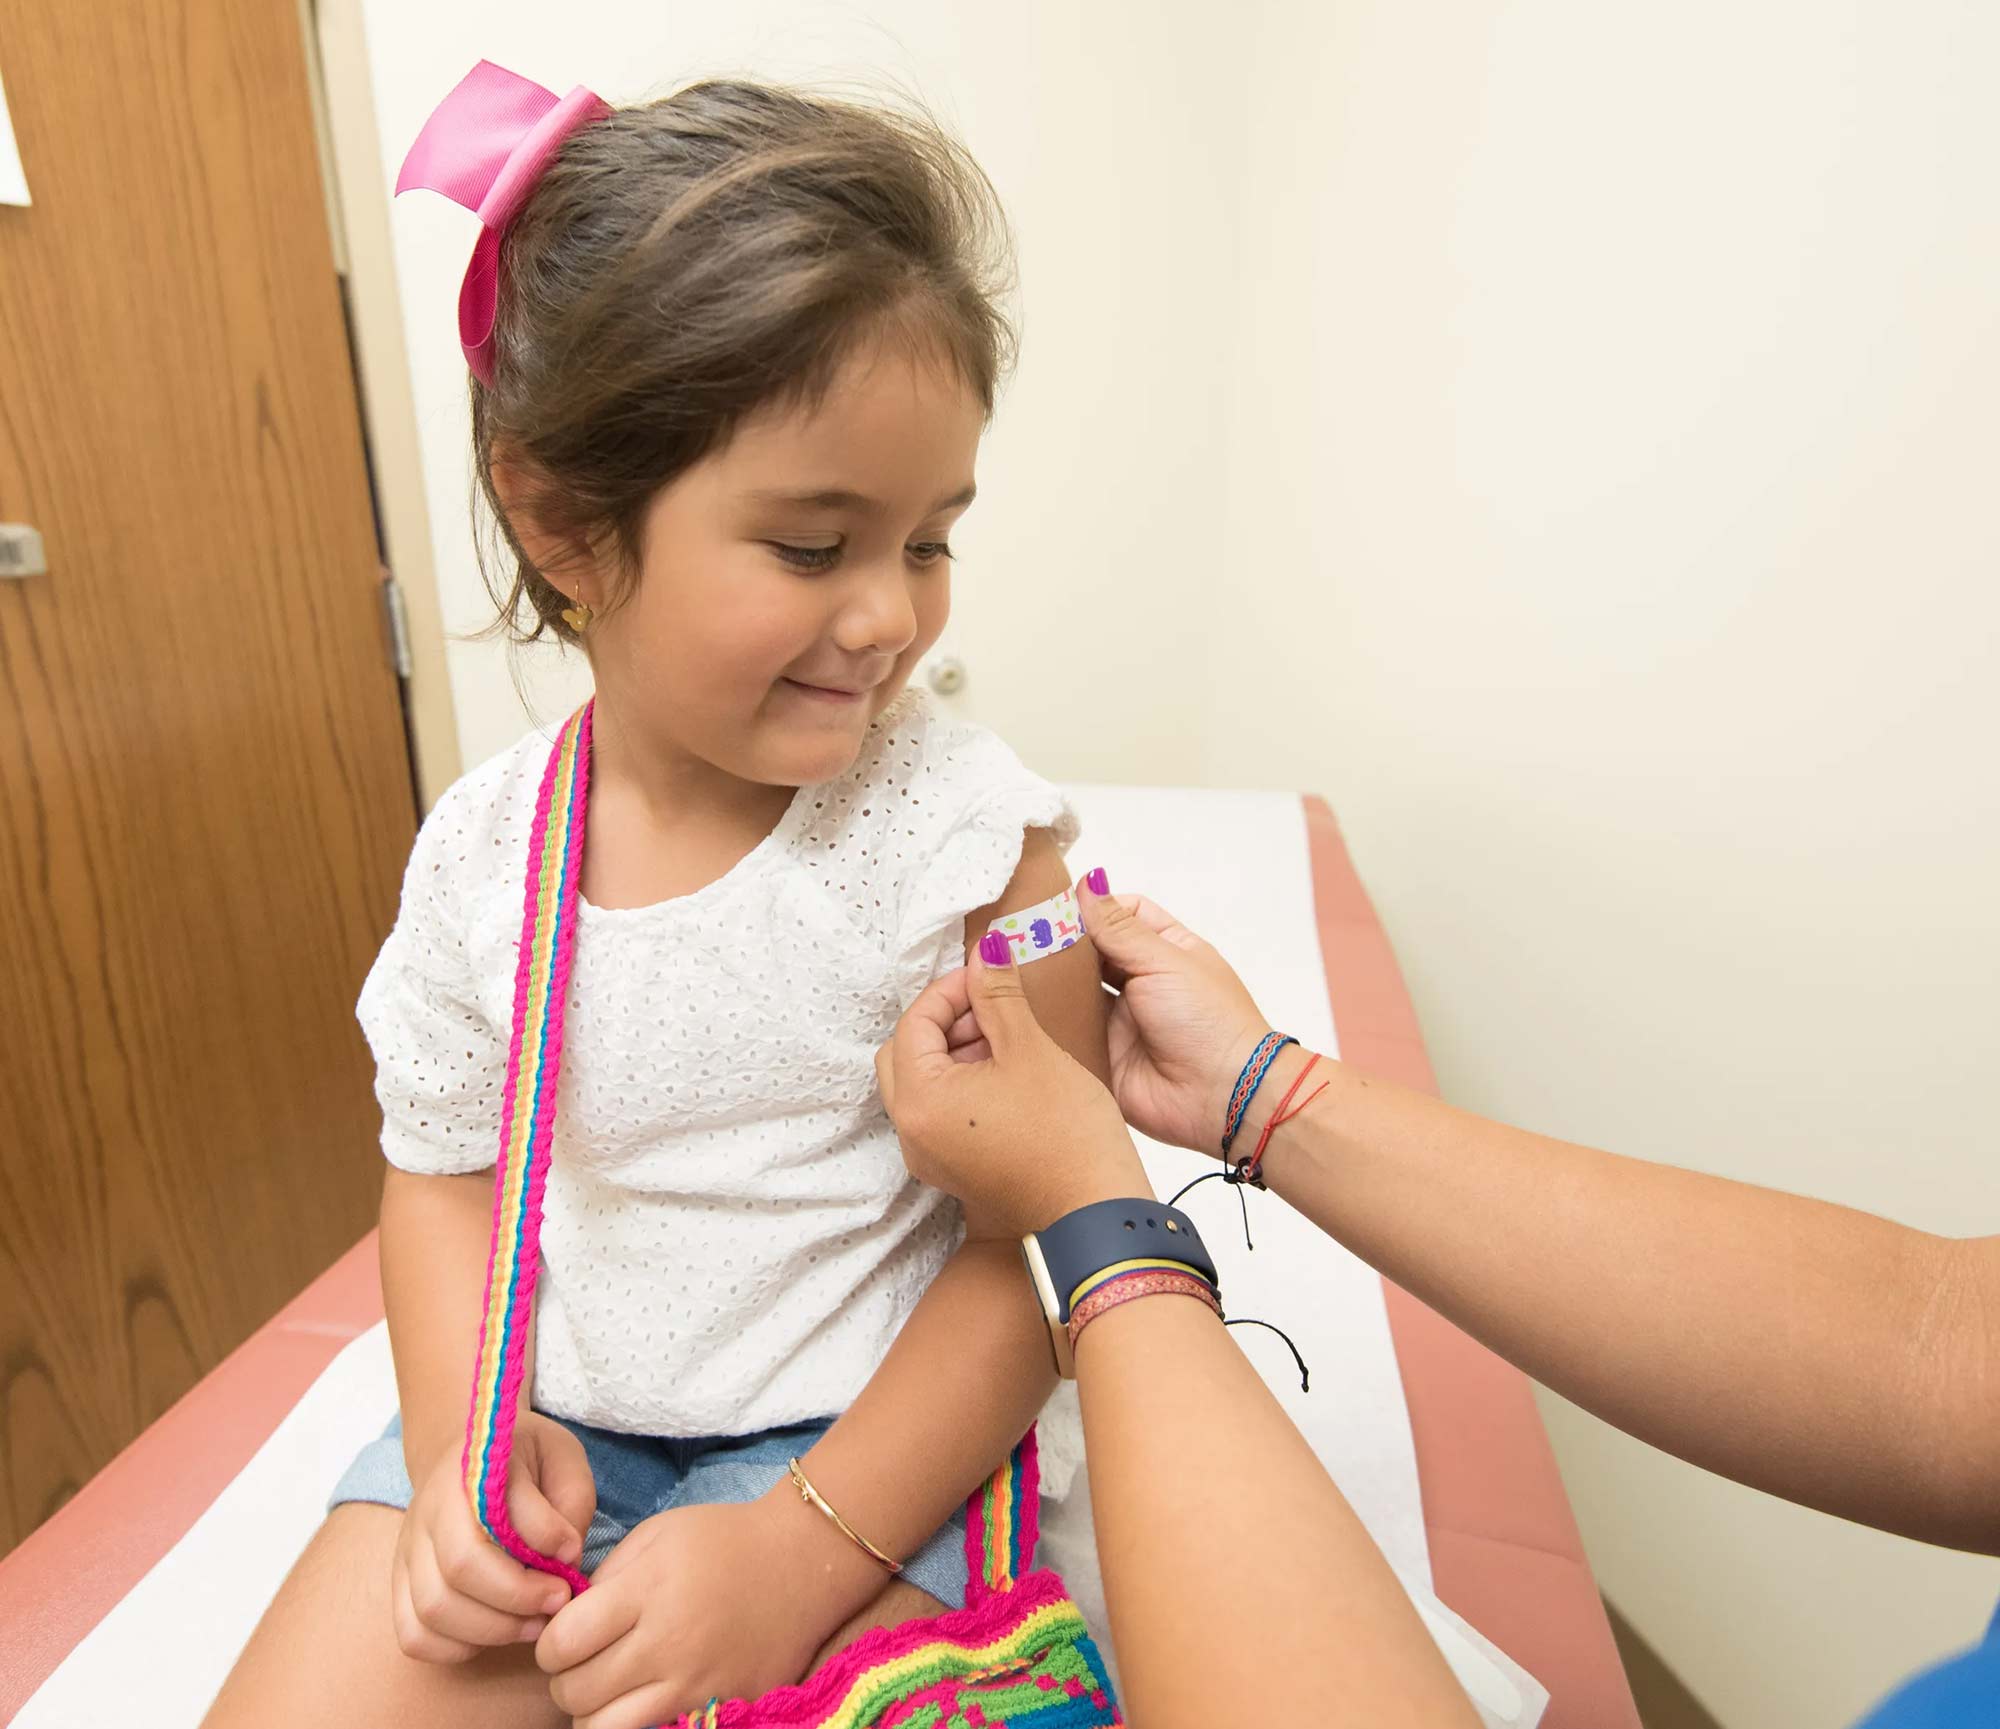 Child receiving bandaid after vaccination shot